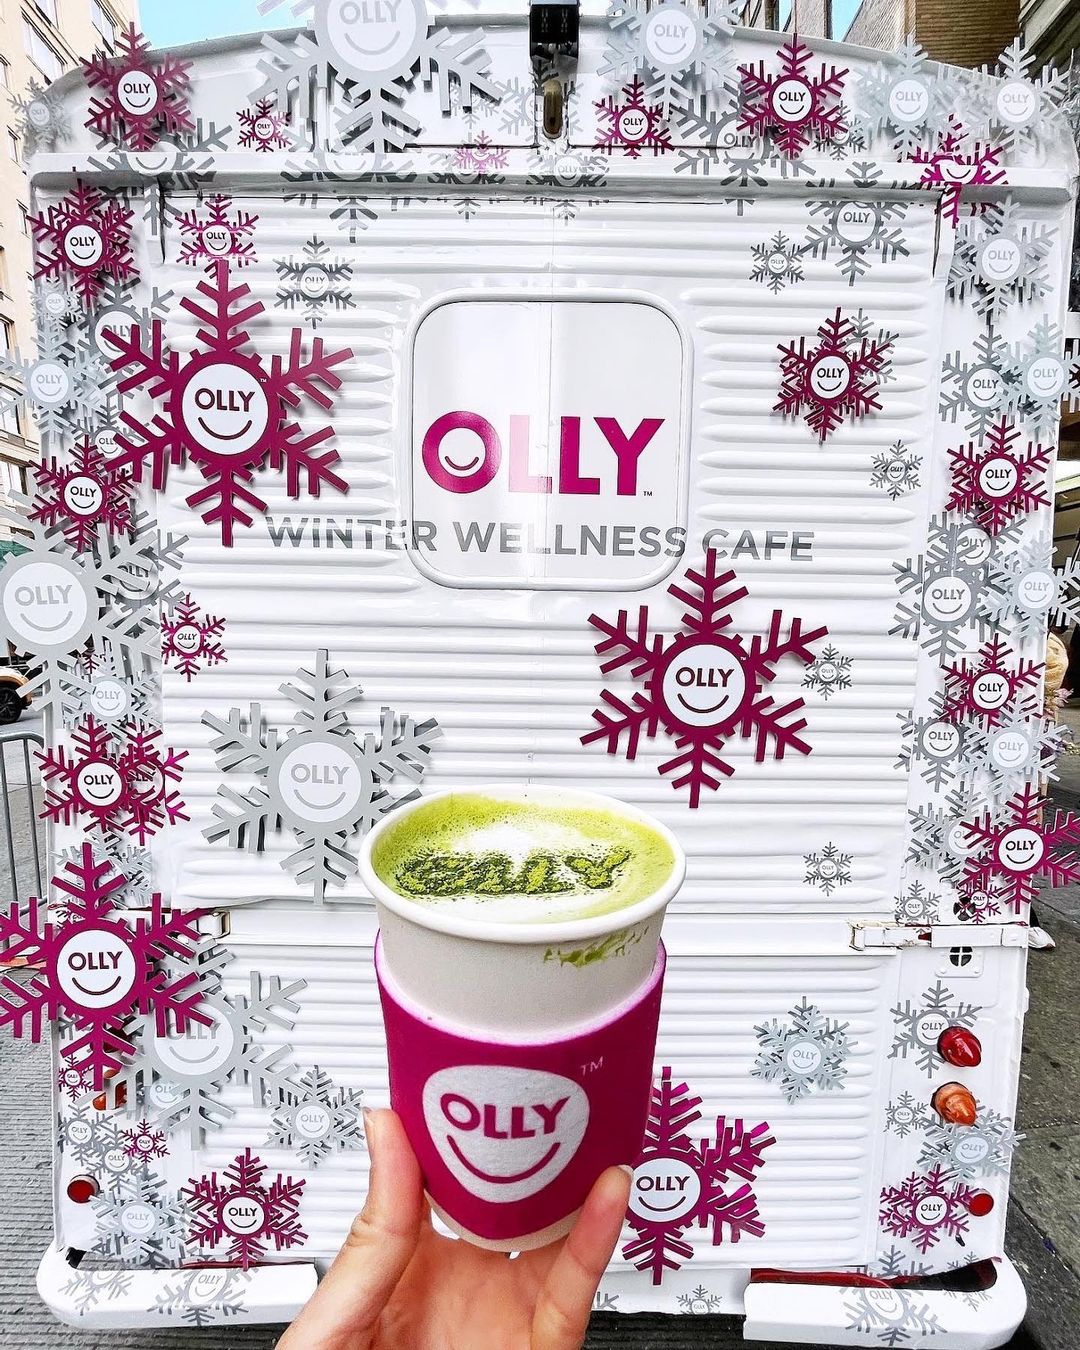 OLLY Matcha Latte from the winter wellness cafe food truck pop up